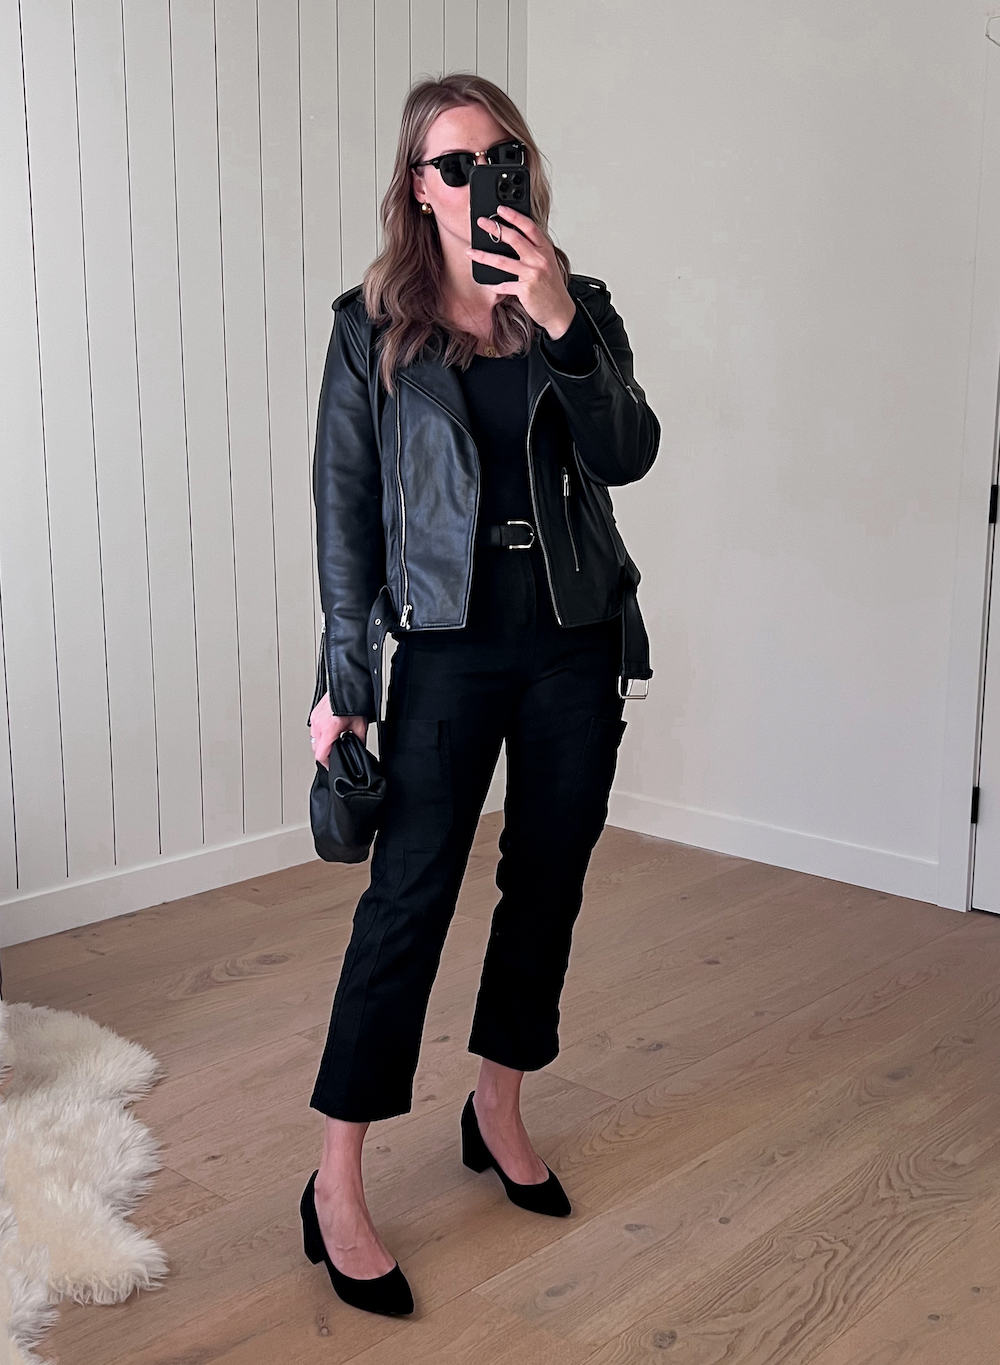 Christal wearing black pants, a black tank top and a black leather jacket with block heels.